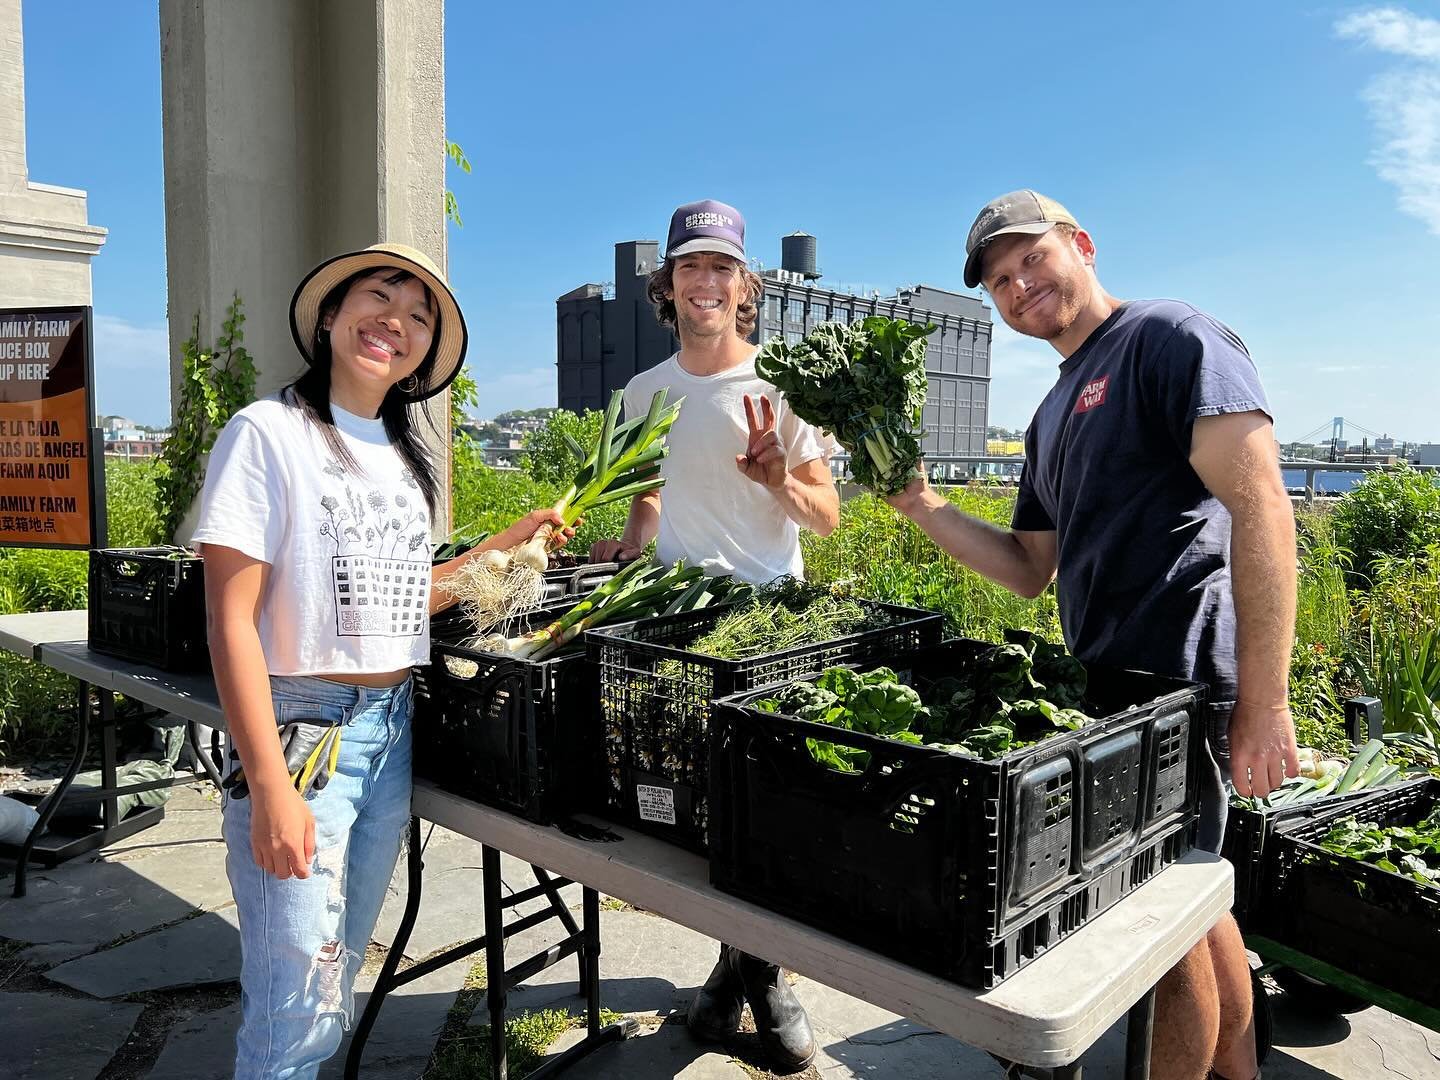 🌱🌇 Hey Sunset Park and surrounding neighbors! 🌇🌱

📢 Guess what? Registration for our Harvest Share program is officially OPEN! 🎉 Dive into a season of fresh, locally grown goodness with our Chinese-vegetable-forward CSA program. It&rsquo;s not 